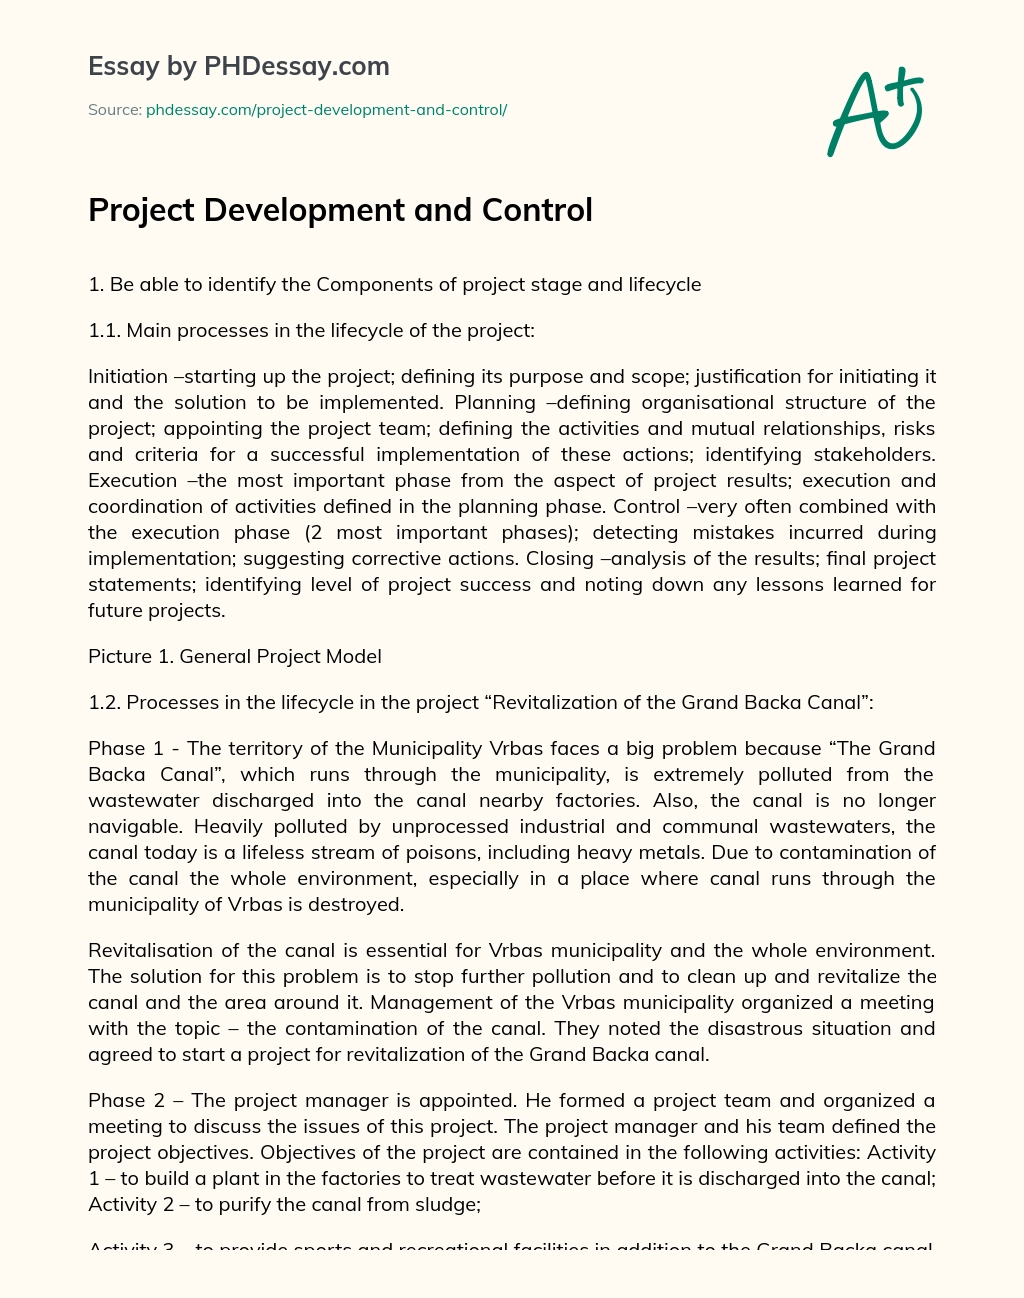 Project Development and Control essay